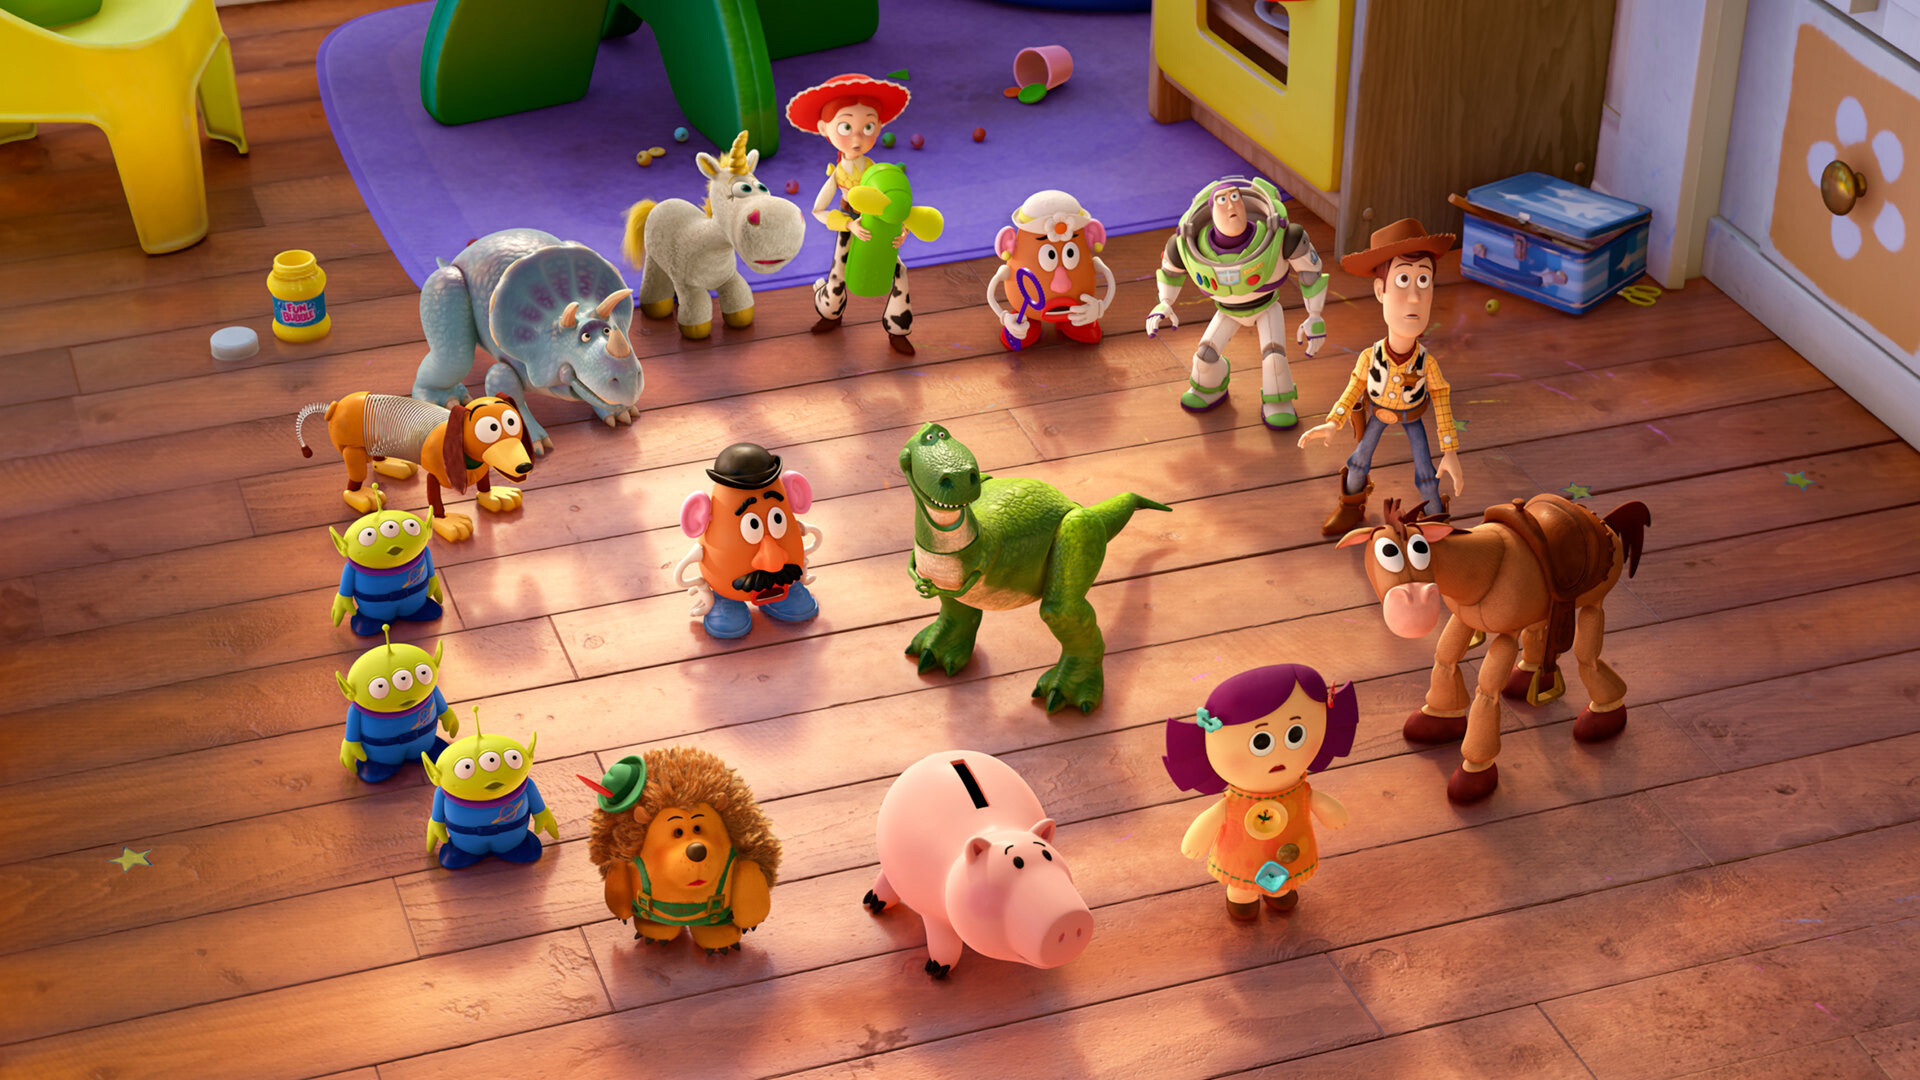 Toy Story characters, Animated adventure, Beloved franchise, Pixar magic, 1920x1080 Full HD Desktop